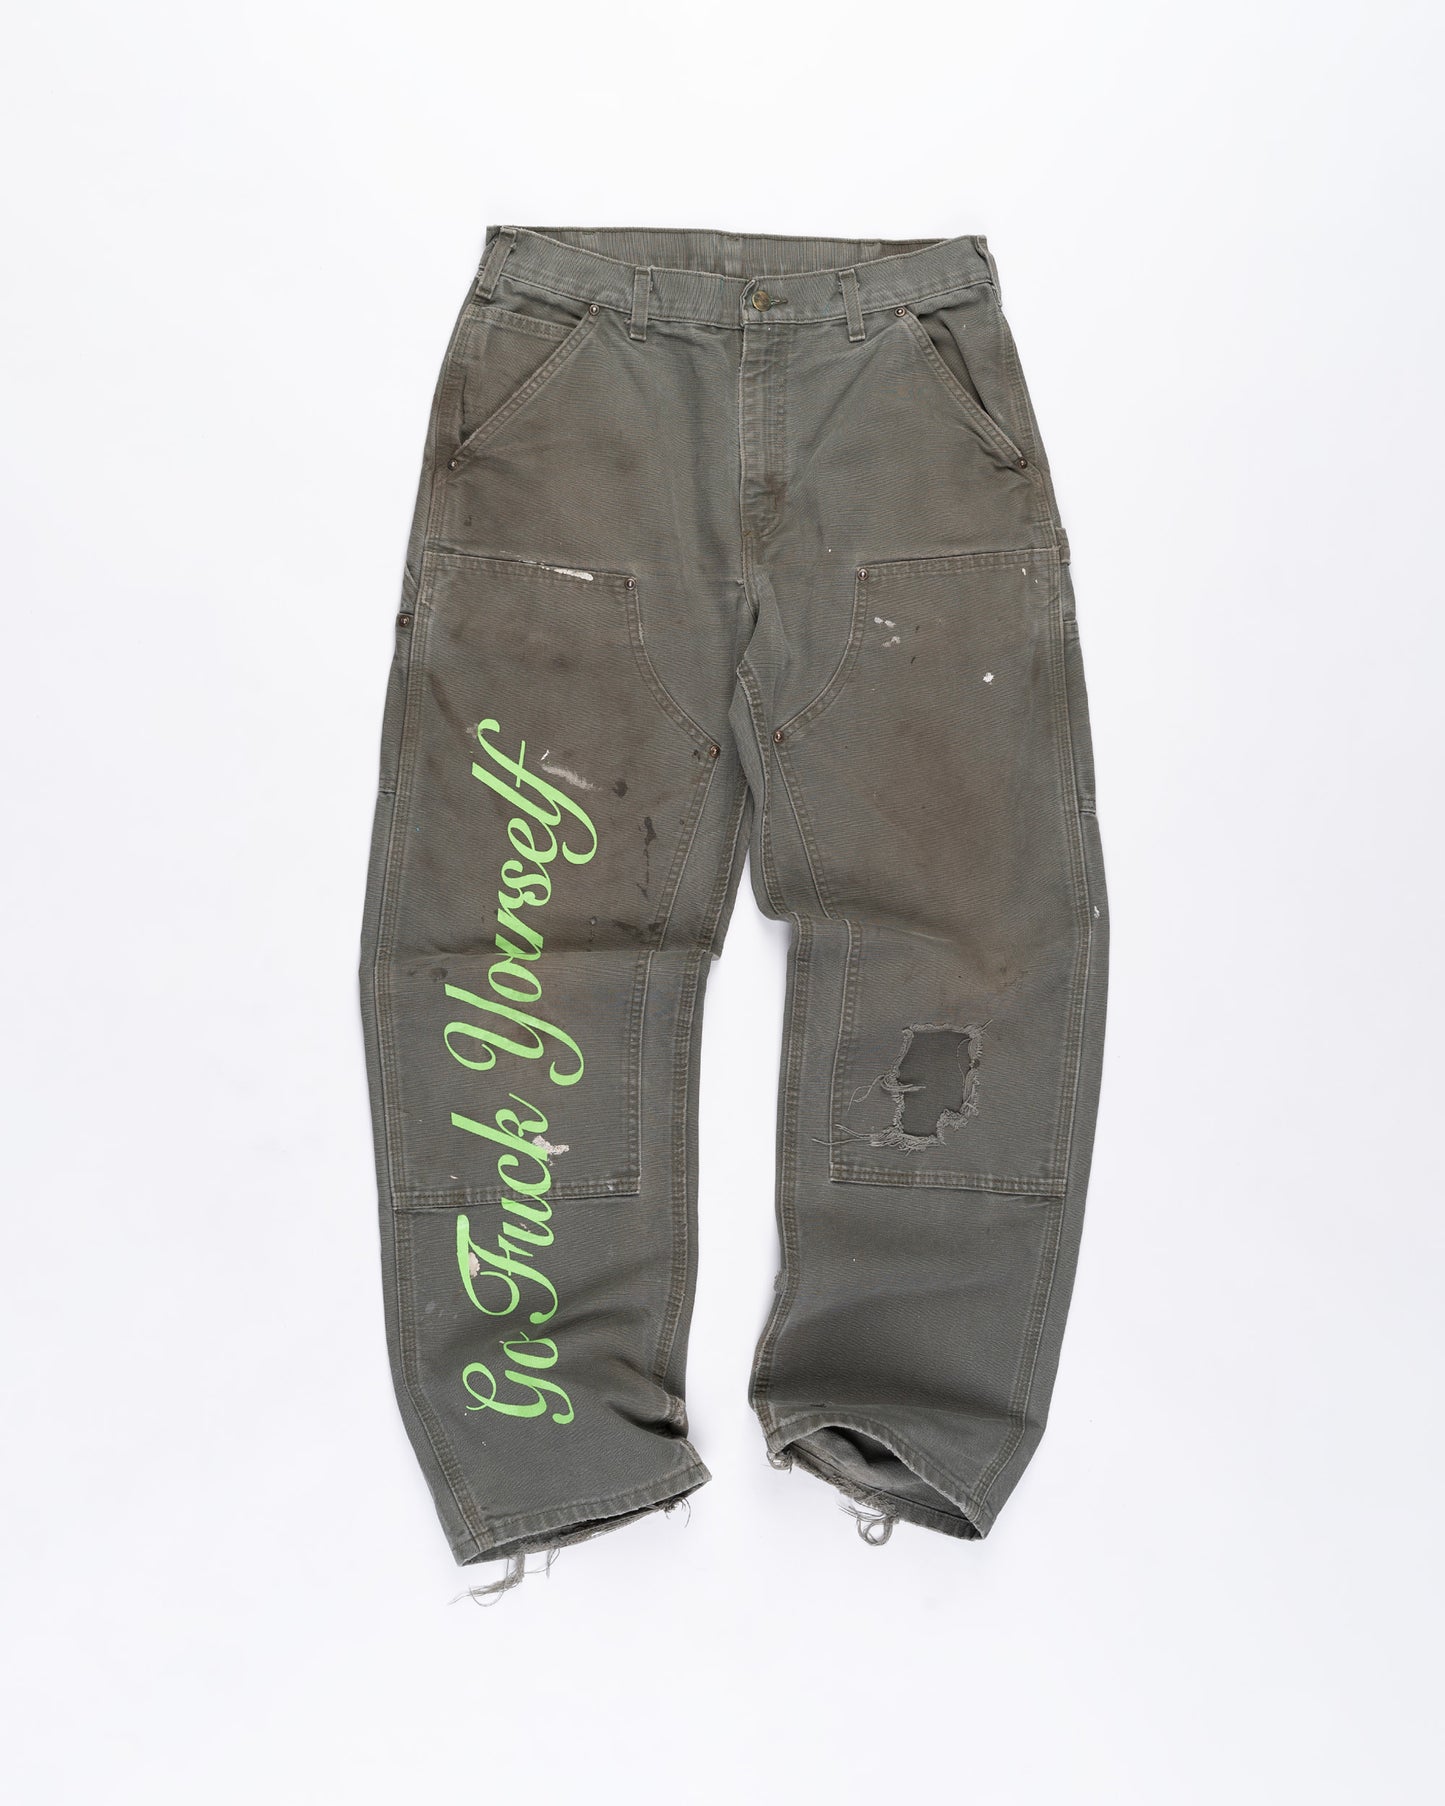 Army Green Cargo Carhart Pants Size: 33